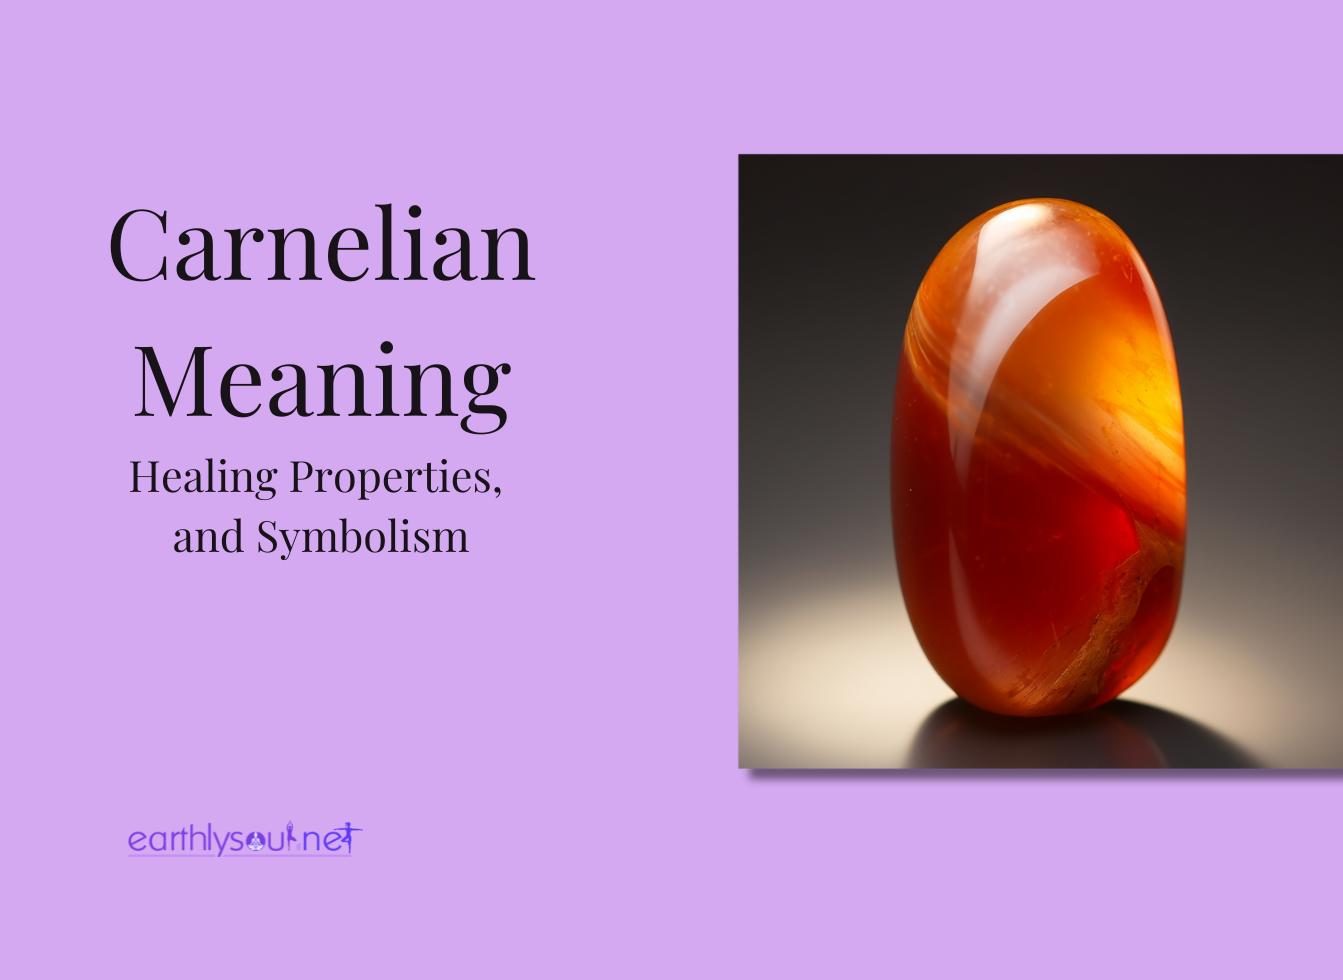 Carnelian meaning featured image